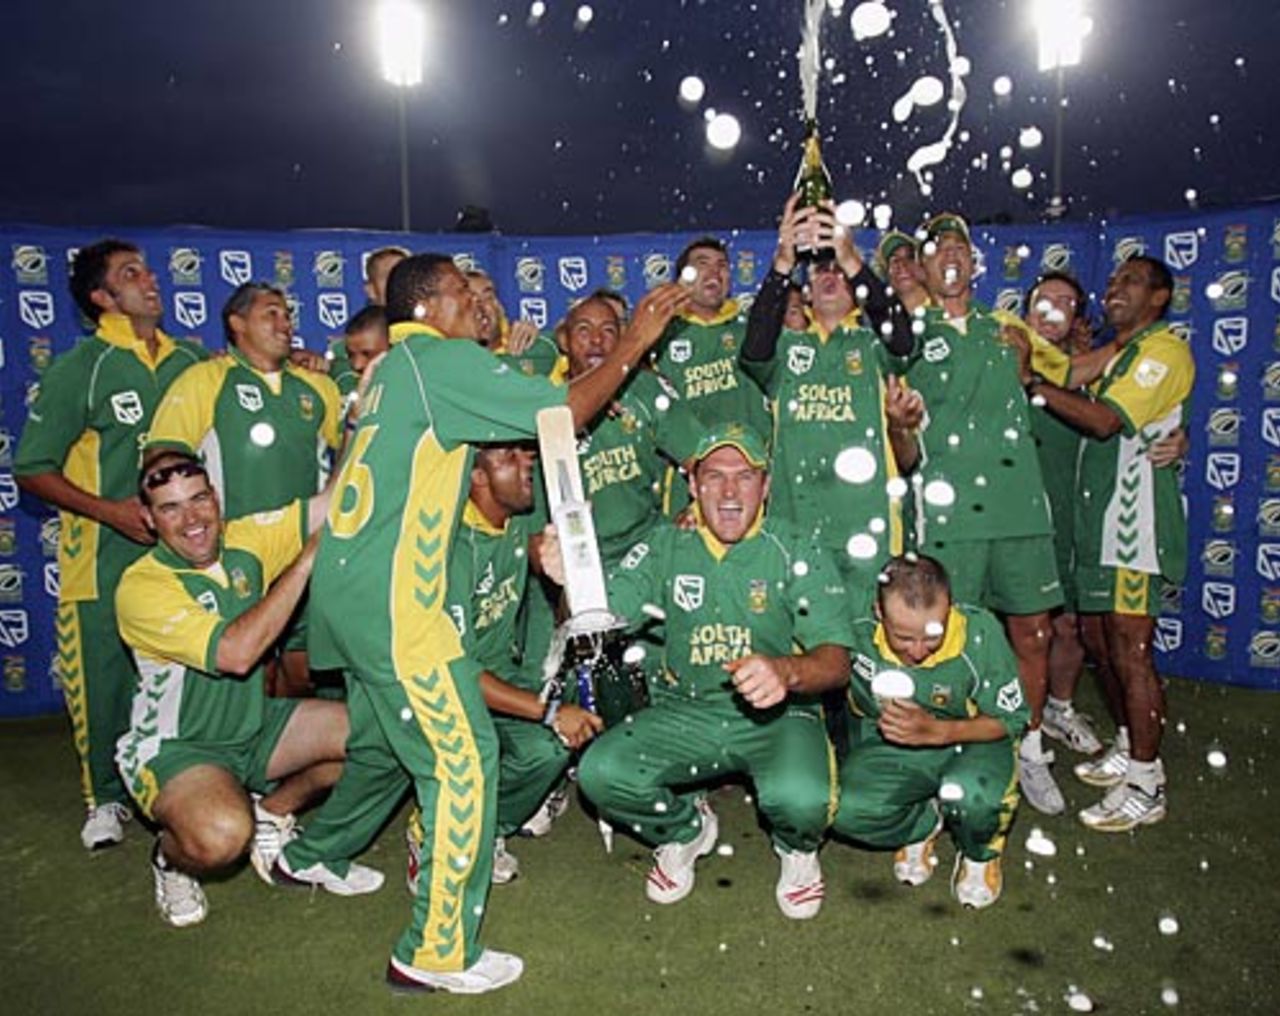 The South Africa team savour their historic win, which gave them the series 3-2, South Africa v Australia, 5th ODI, Johannesburg, March 12, 2006